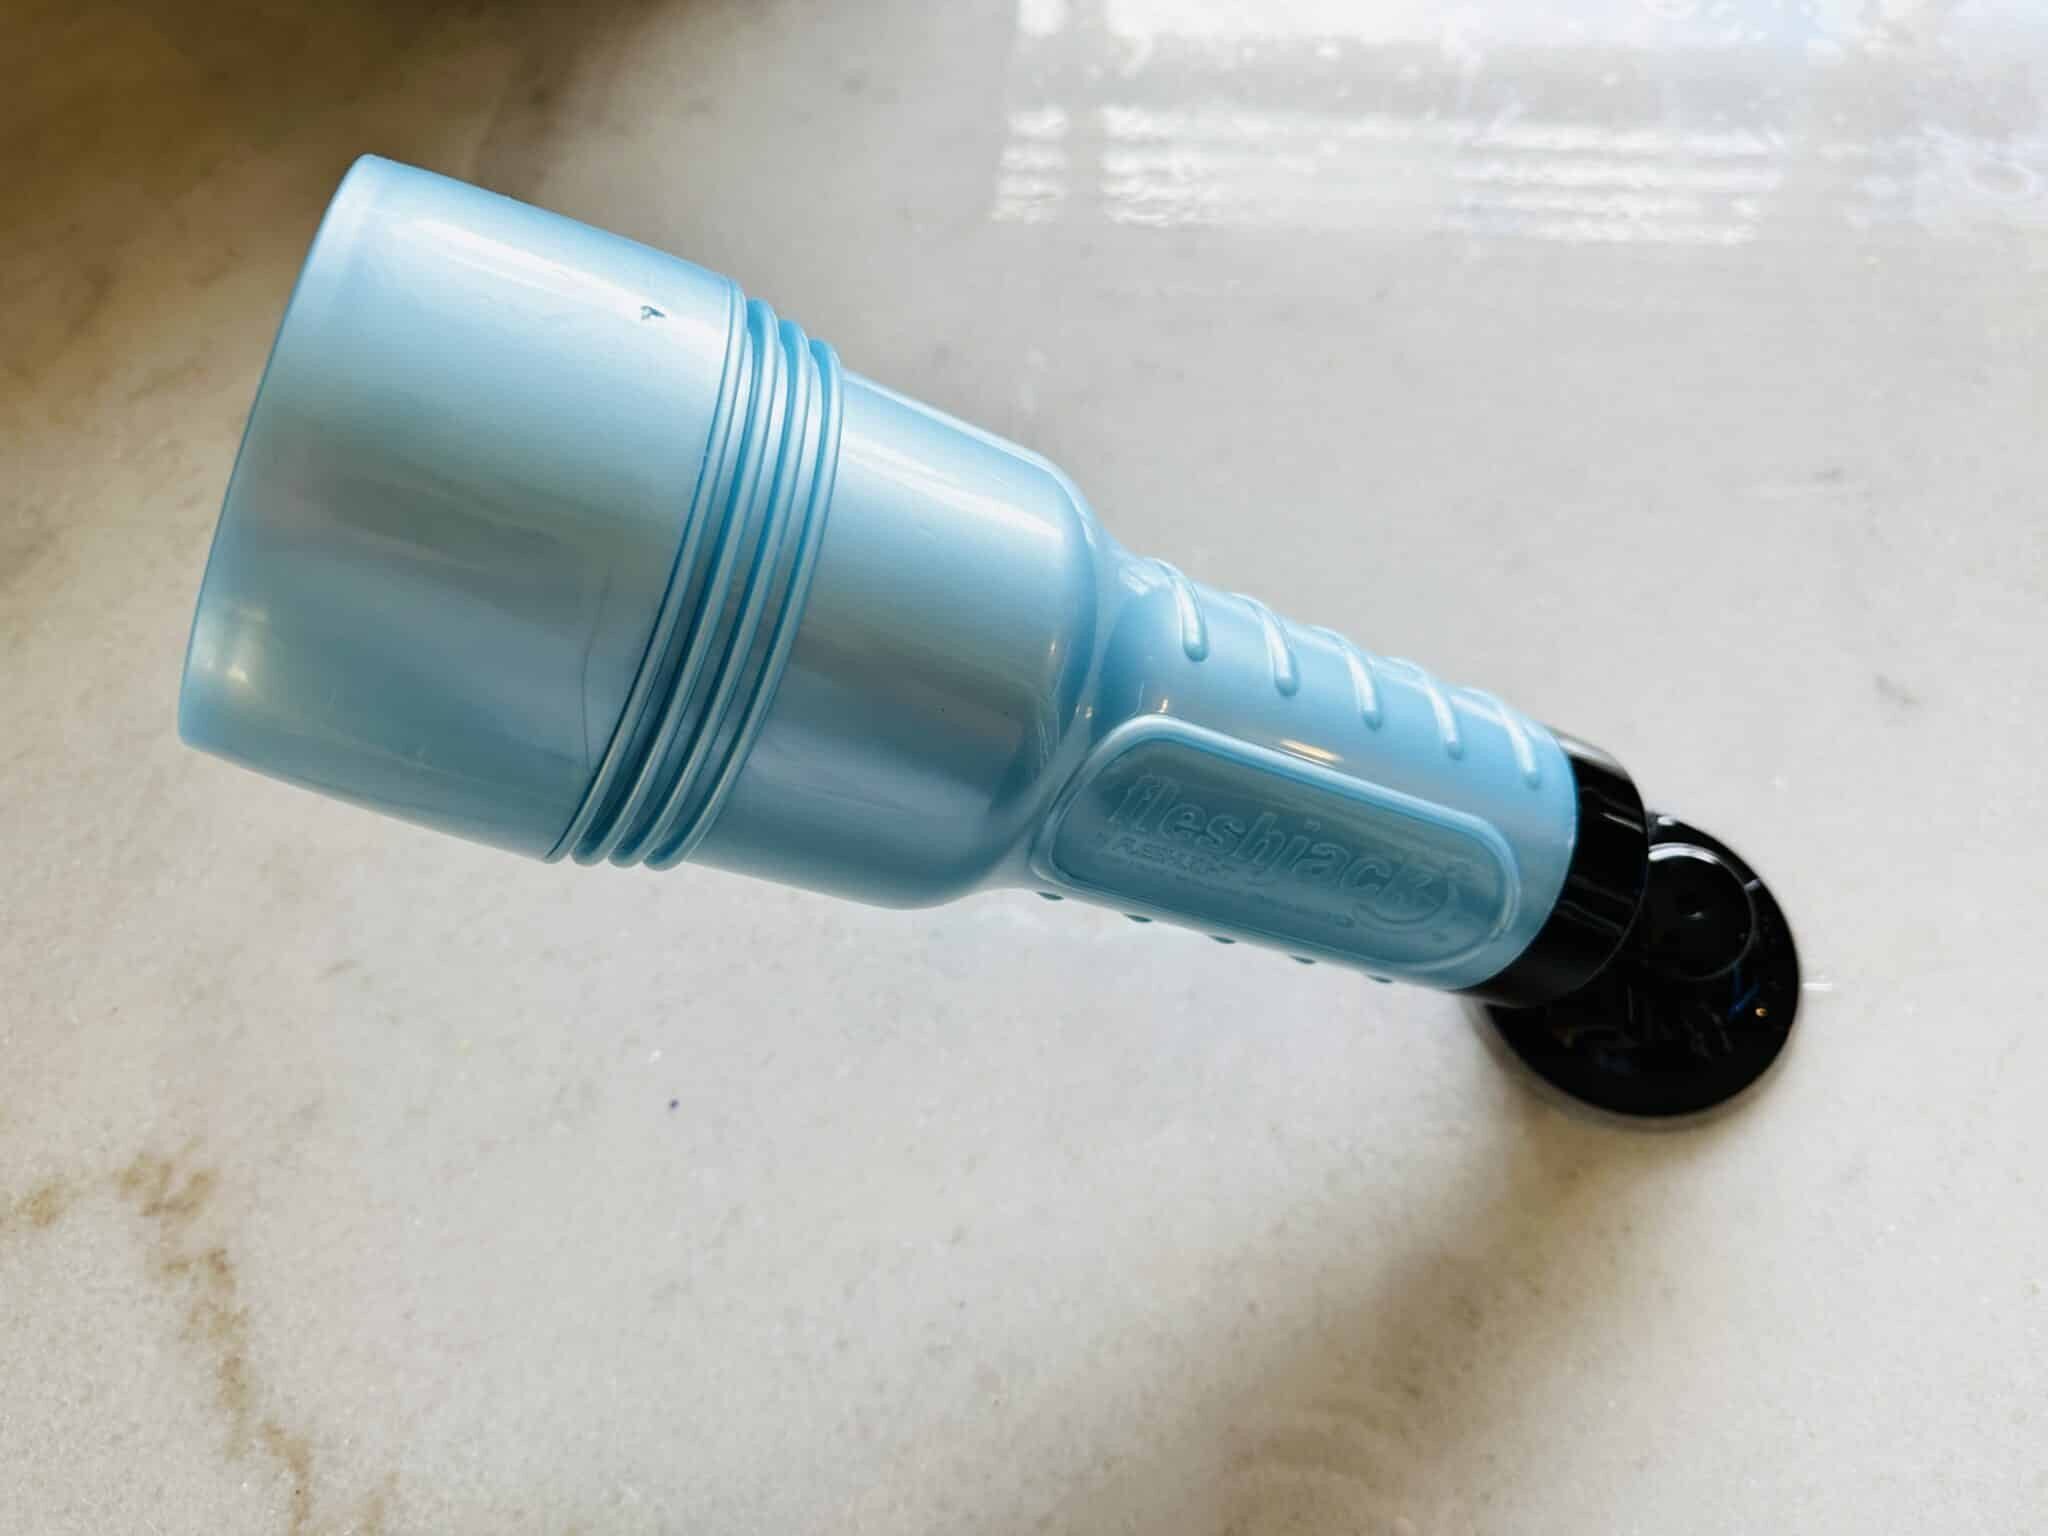 My Personal Experiences with Fleshlight Shower Mount